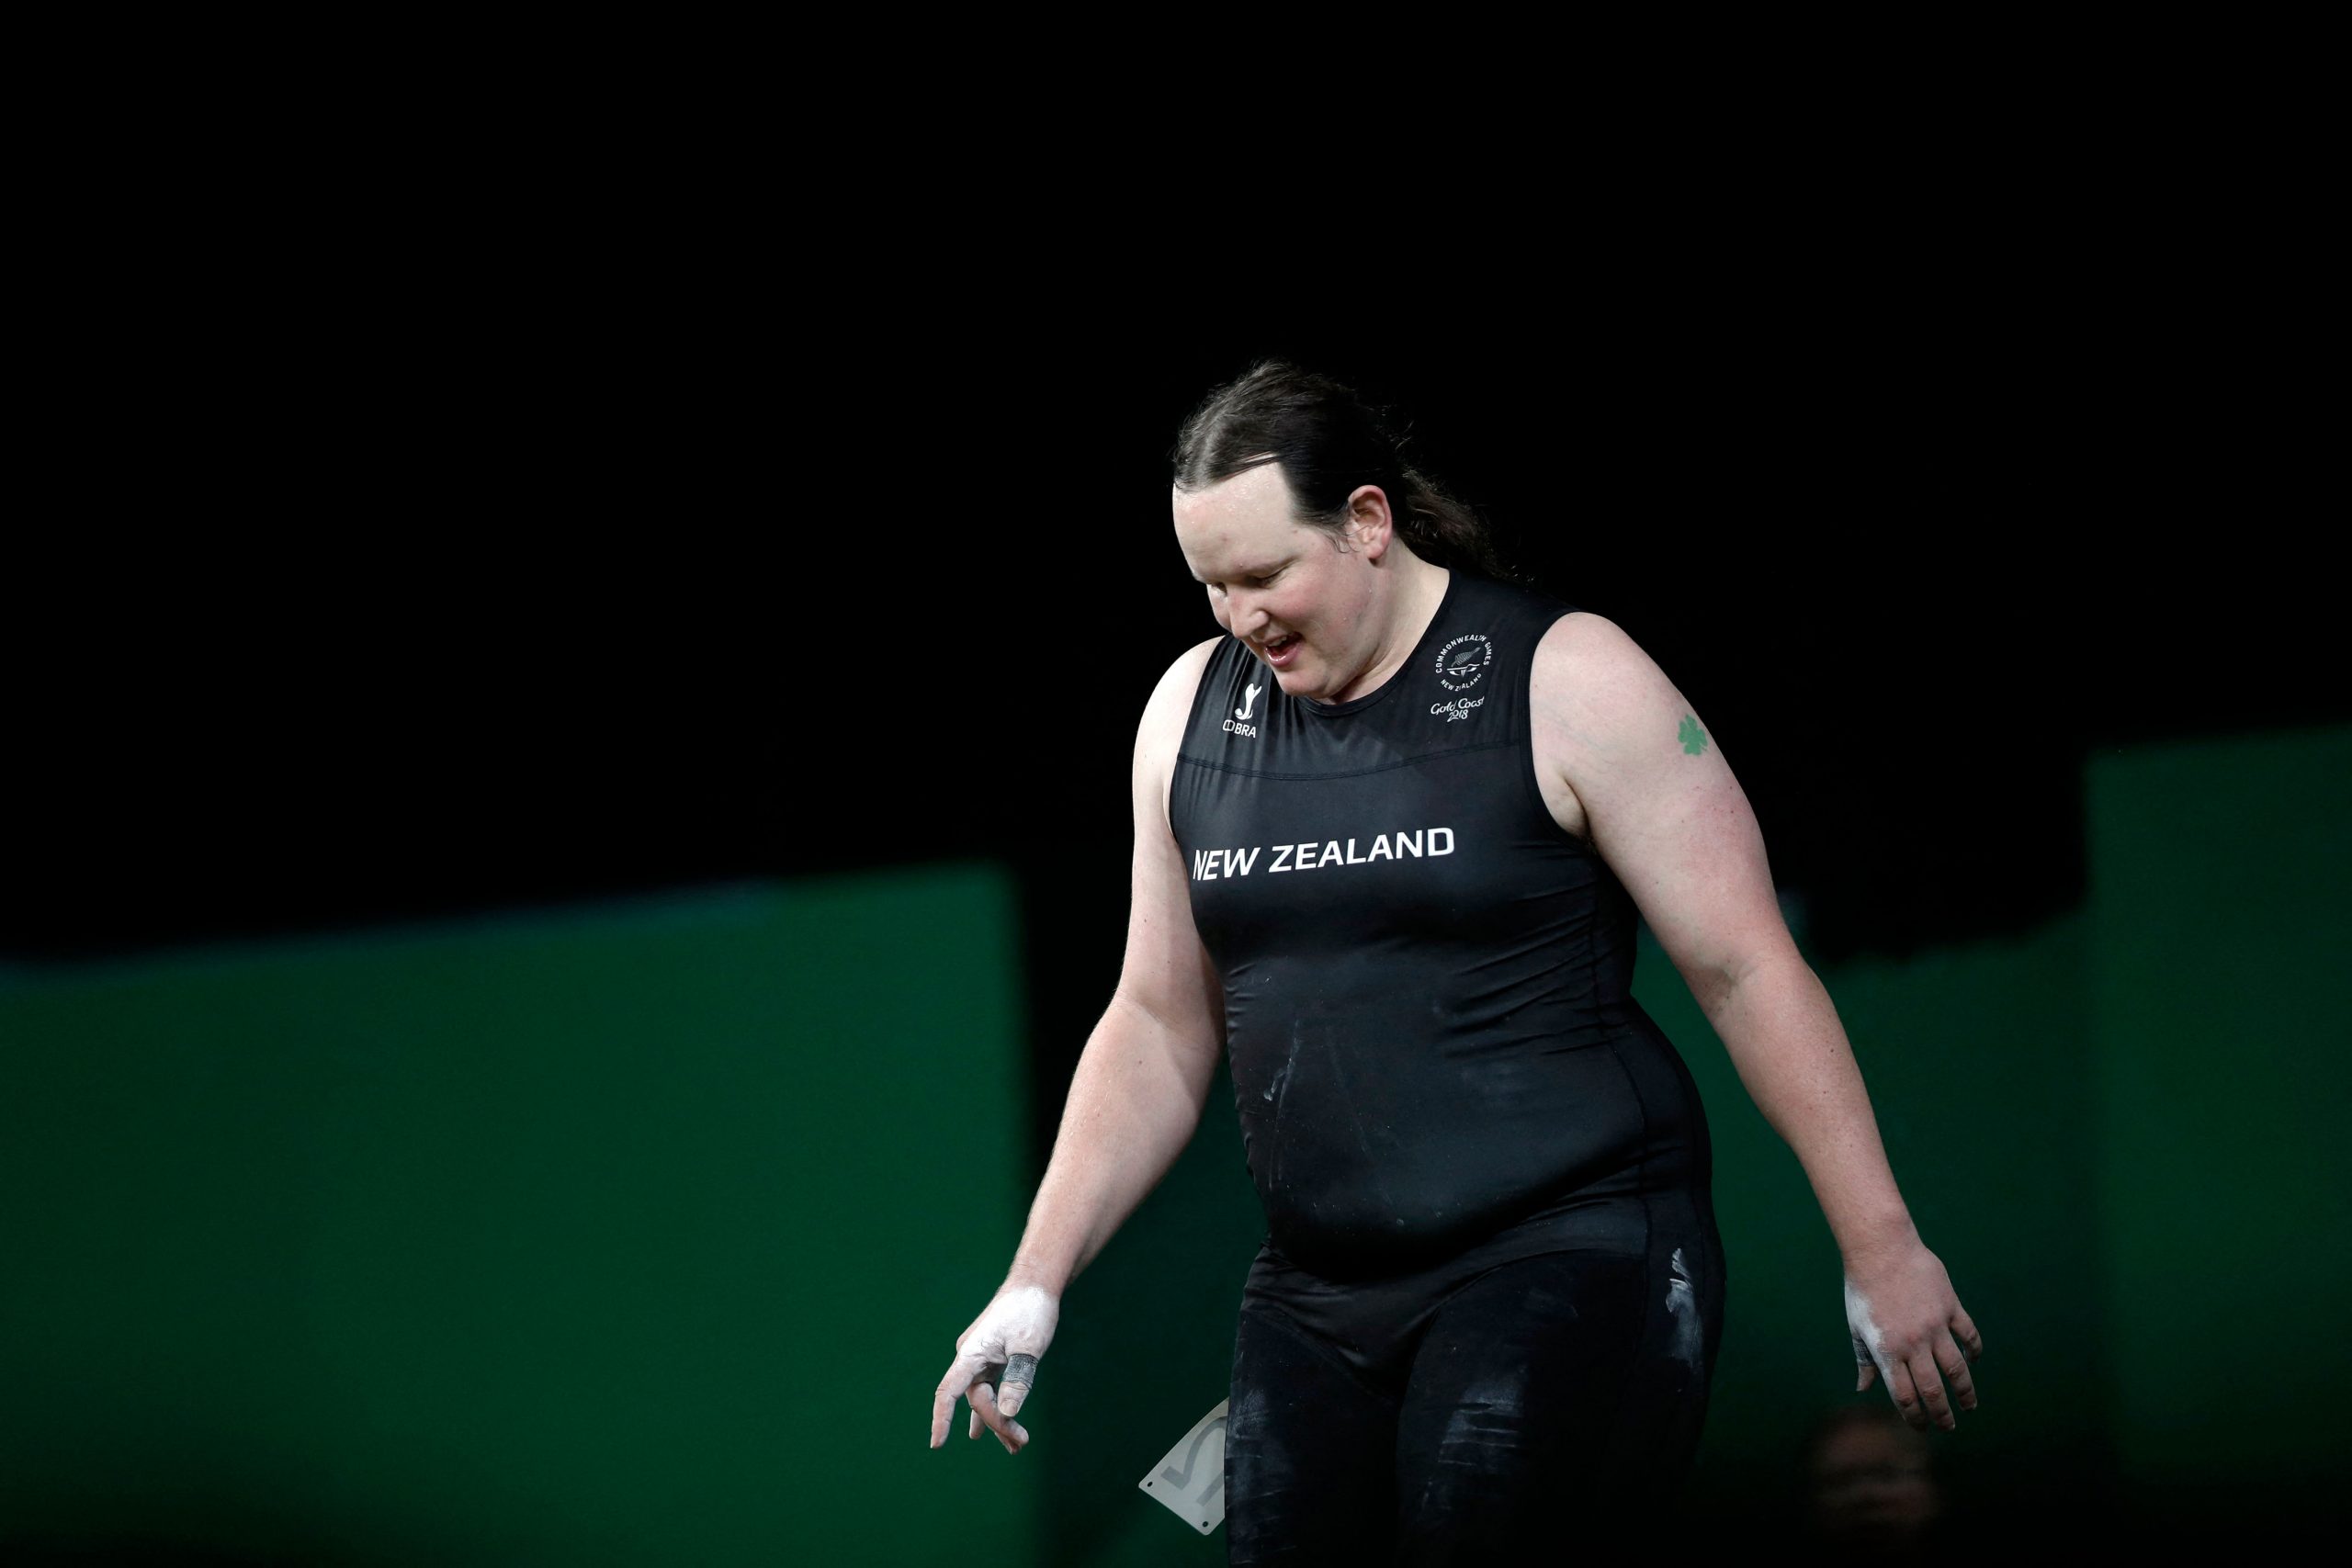 New Zealand’s Laurel Hubbard to be first transgender Olympian